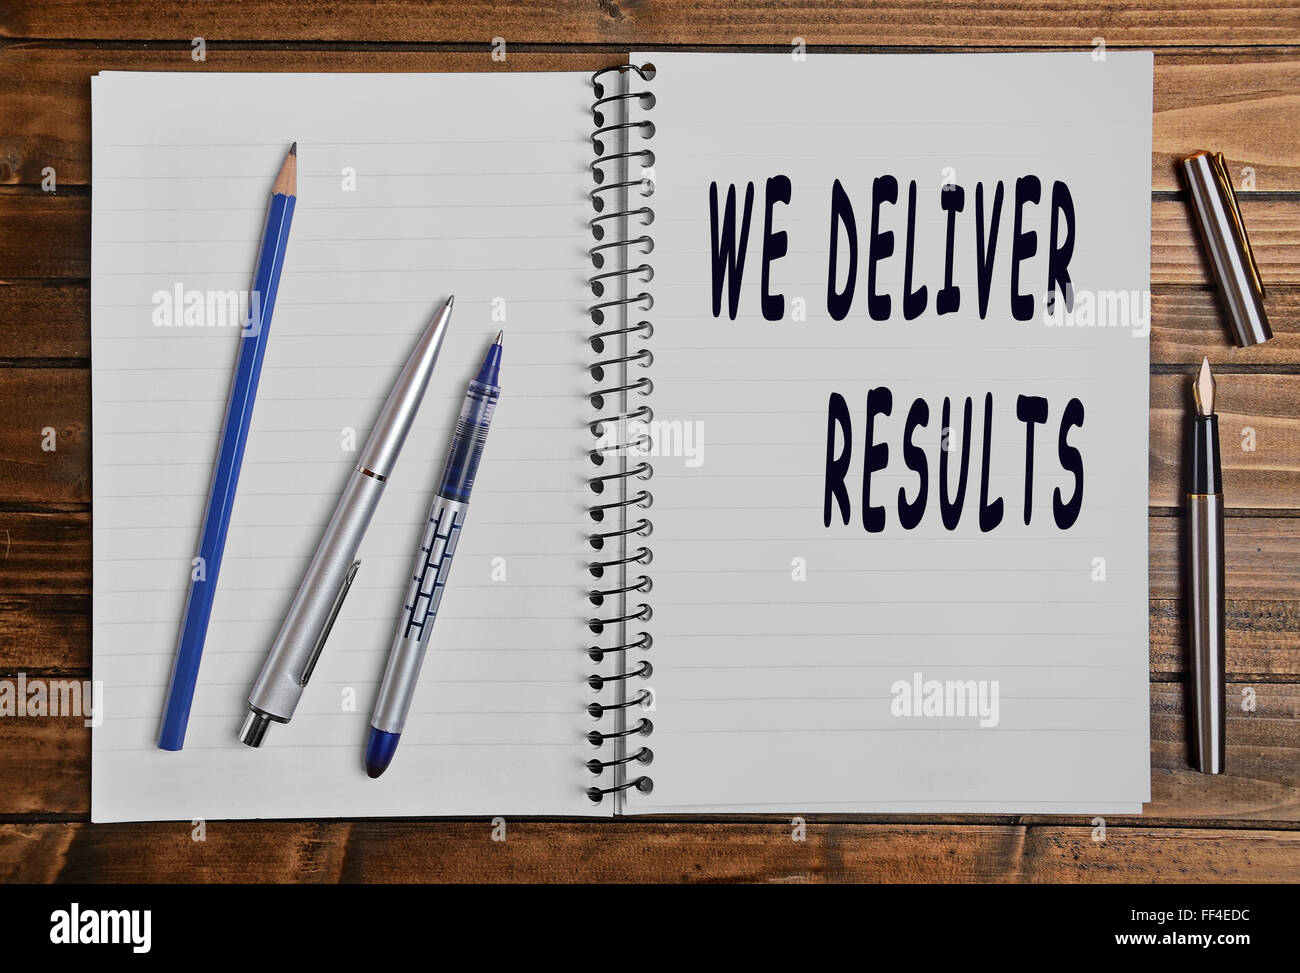 We deliver results text on notebook Stock Photo